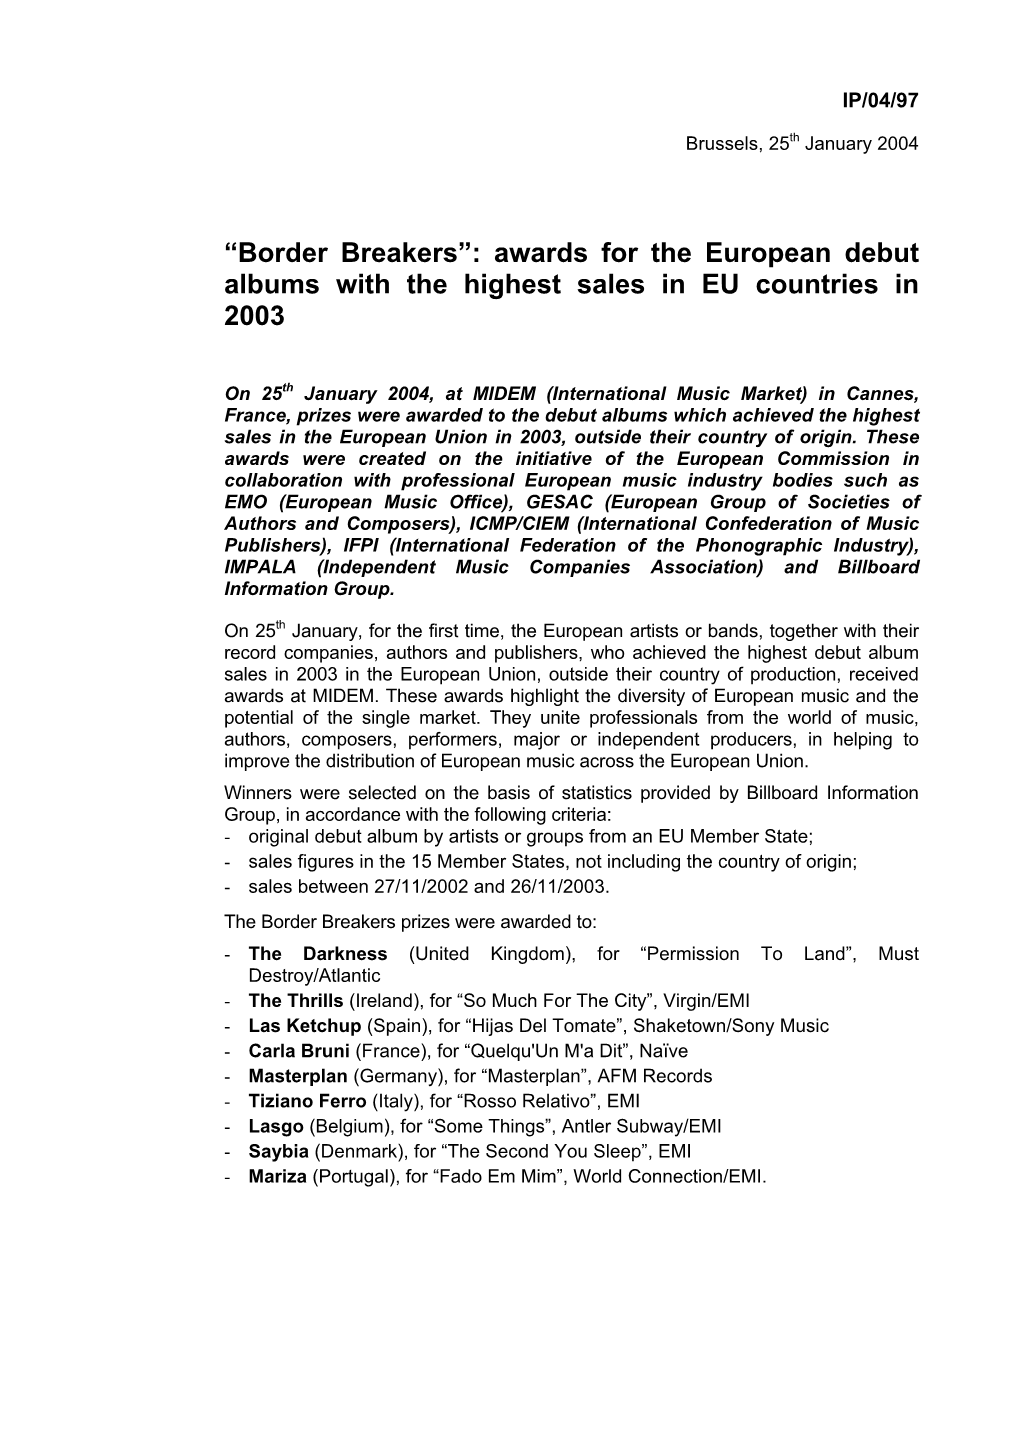 “Border Breakers”: Awards for the European Debut Albums with the Highest Sales in EU Countries in 2003